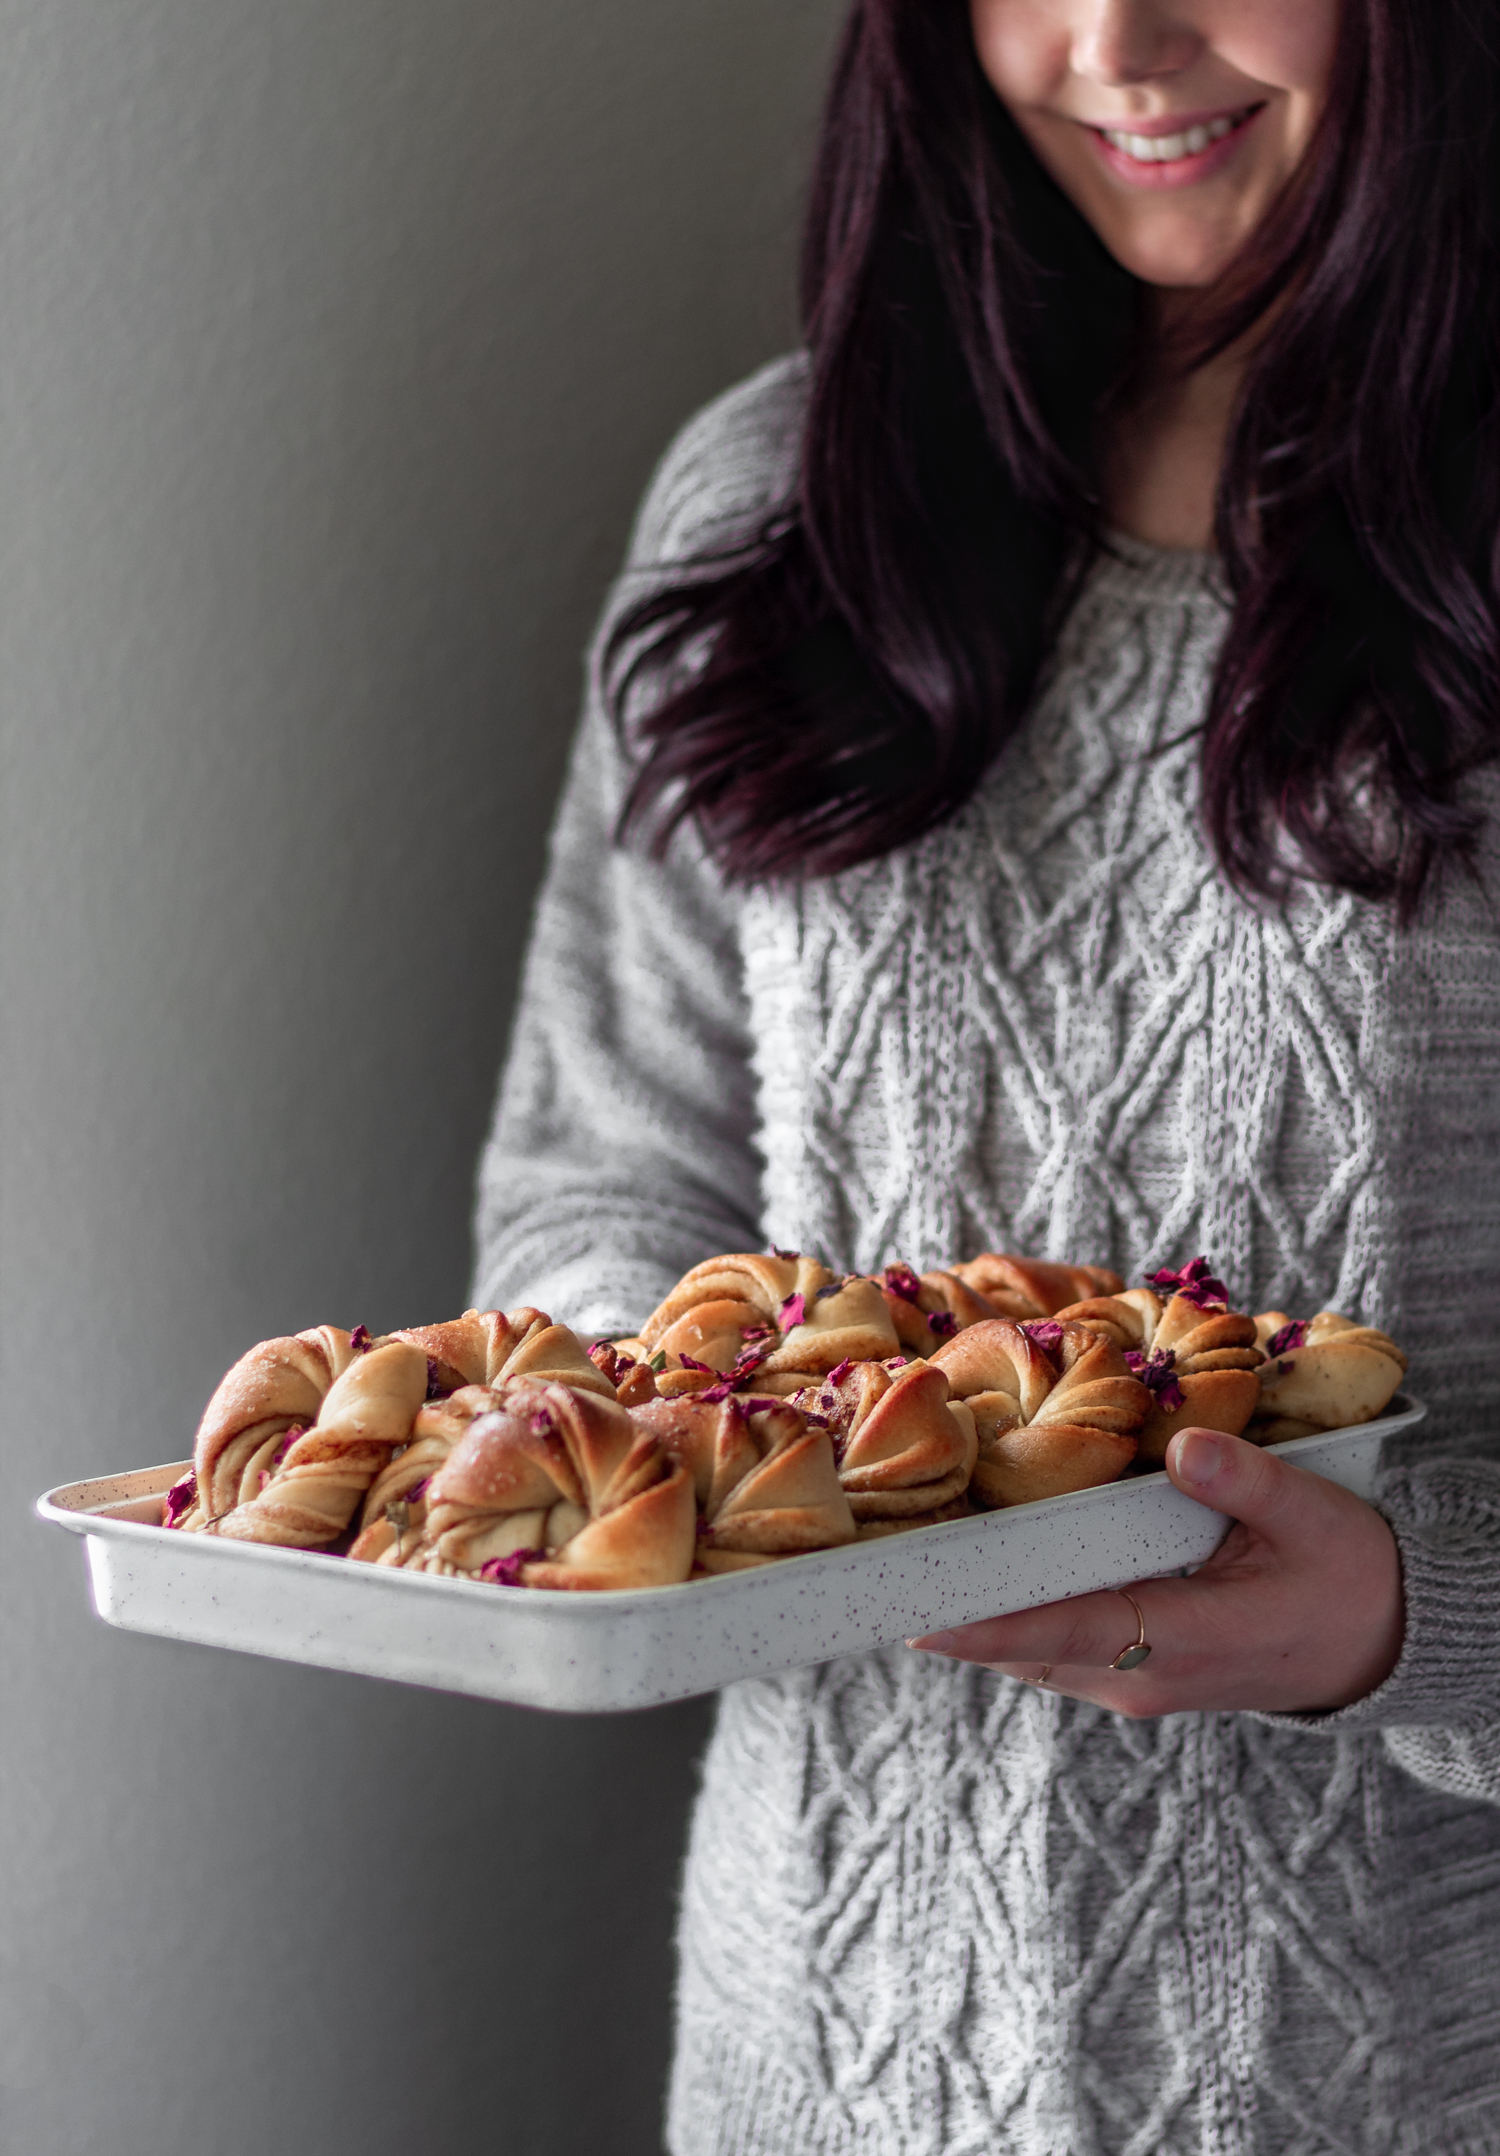 A side image of a woman with dark purple-red hair wearing a grey sweater holding a white tray of Swedish cinnamon buns.